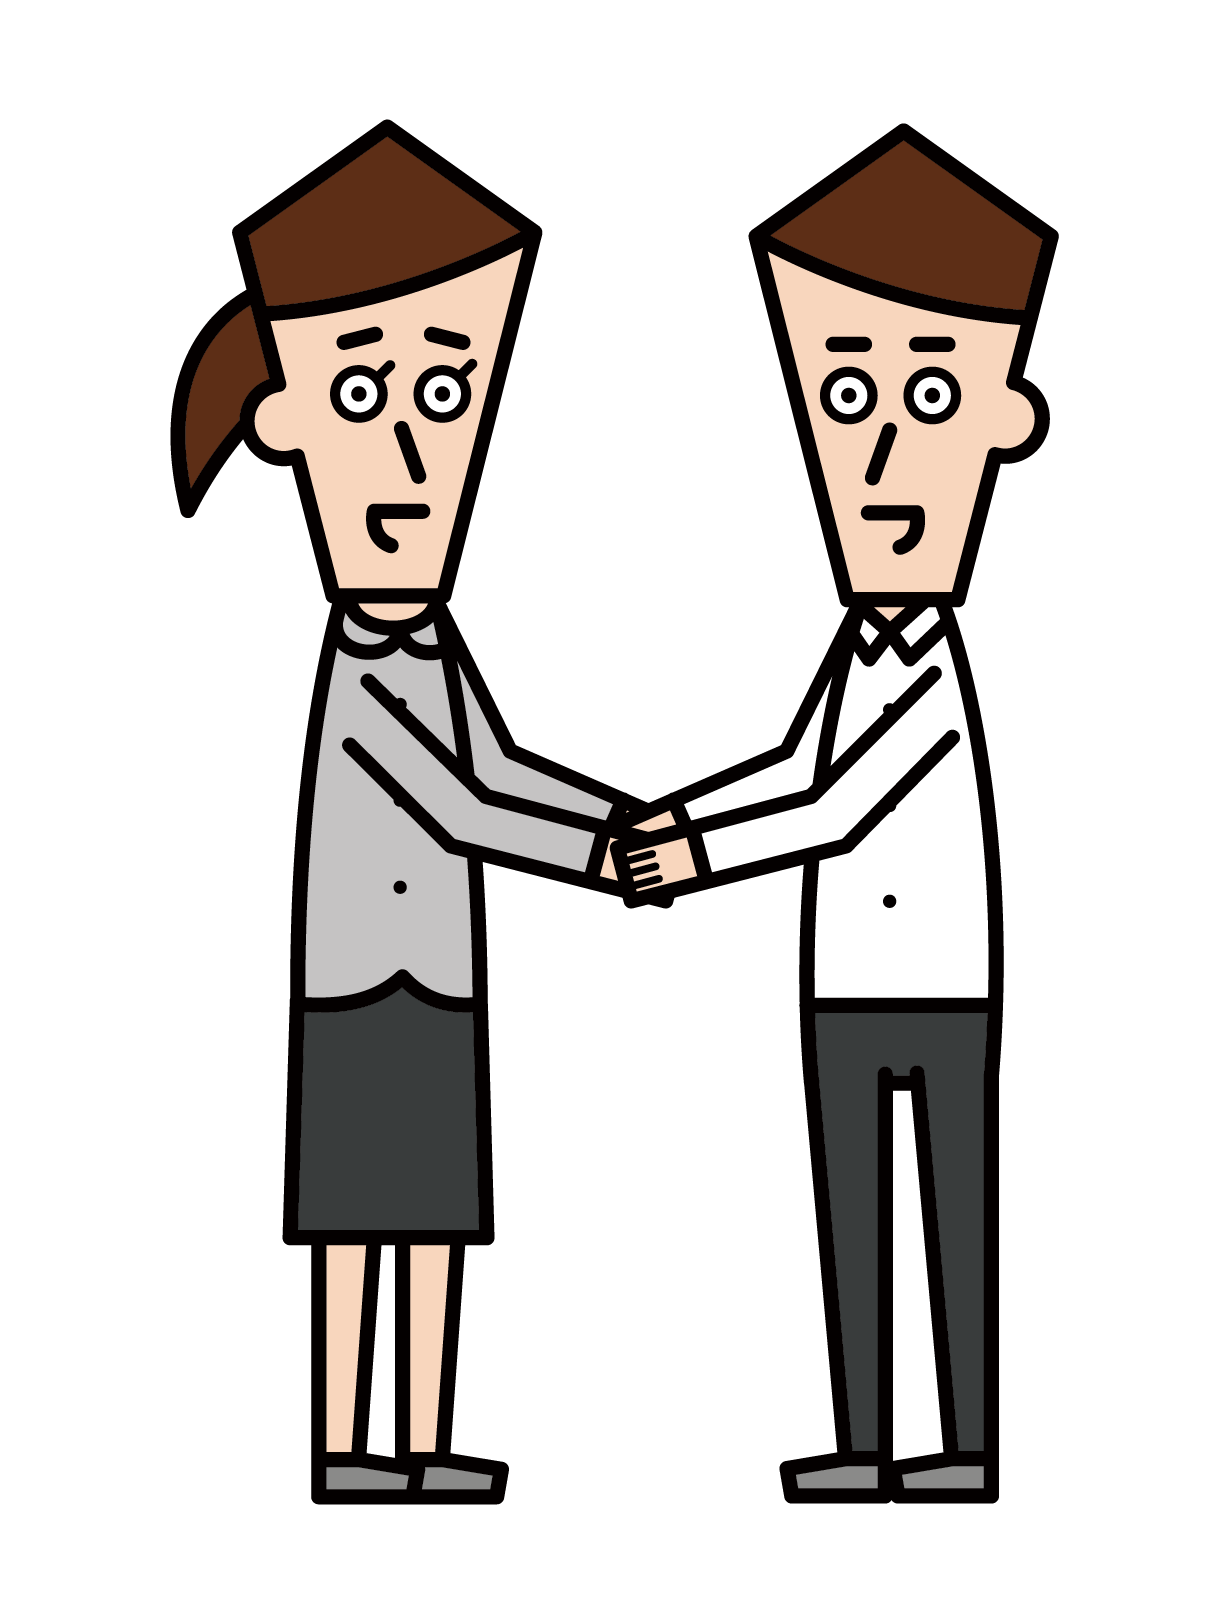 Illustration of people shaking hands and trusting relationships